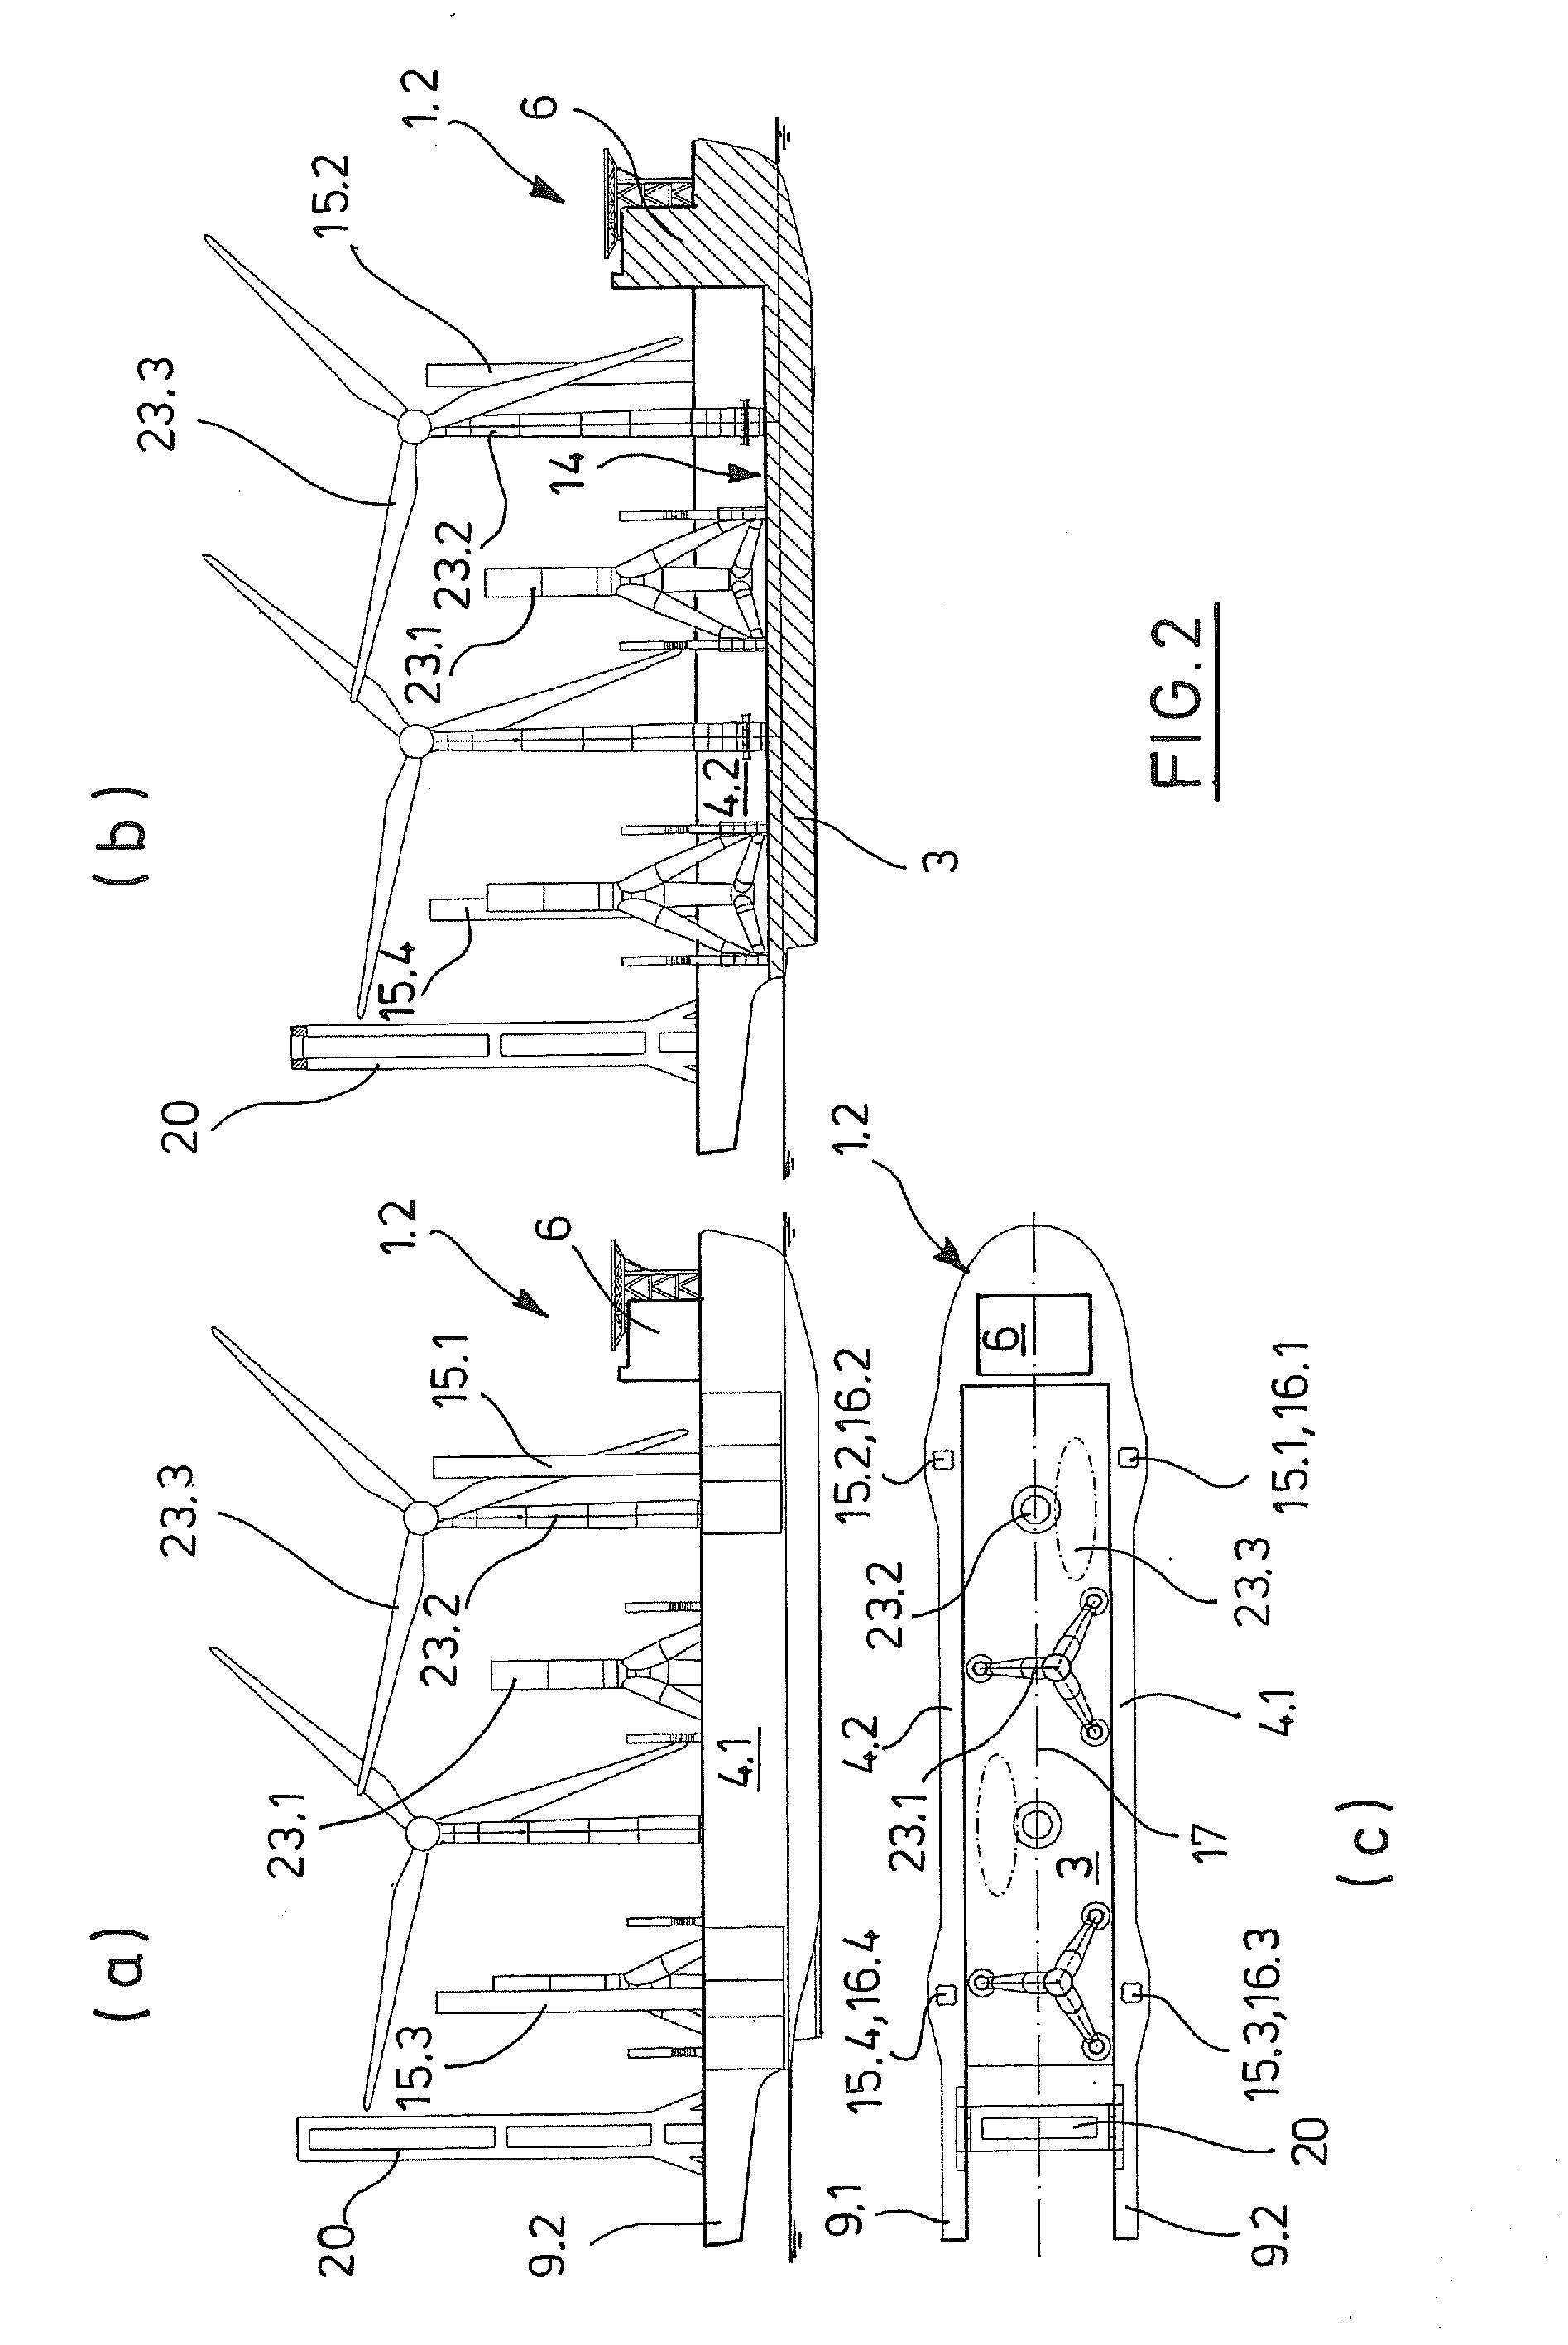 Ship and Method for Conveying and Setting Up Offshore Structures